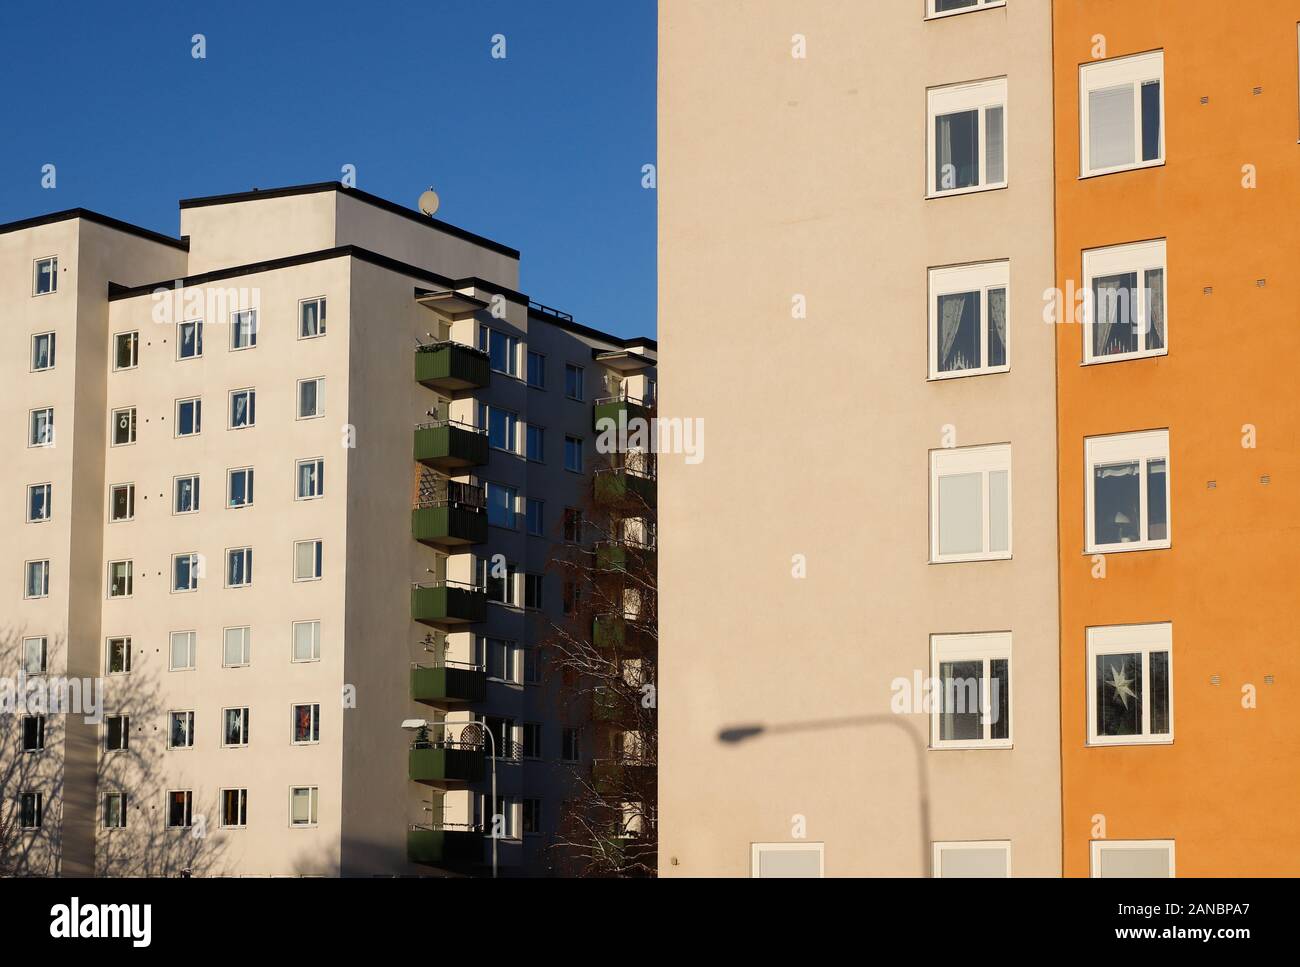 High-rise multi-family 1950s buildings exterior view. Stock Photo